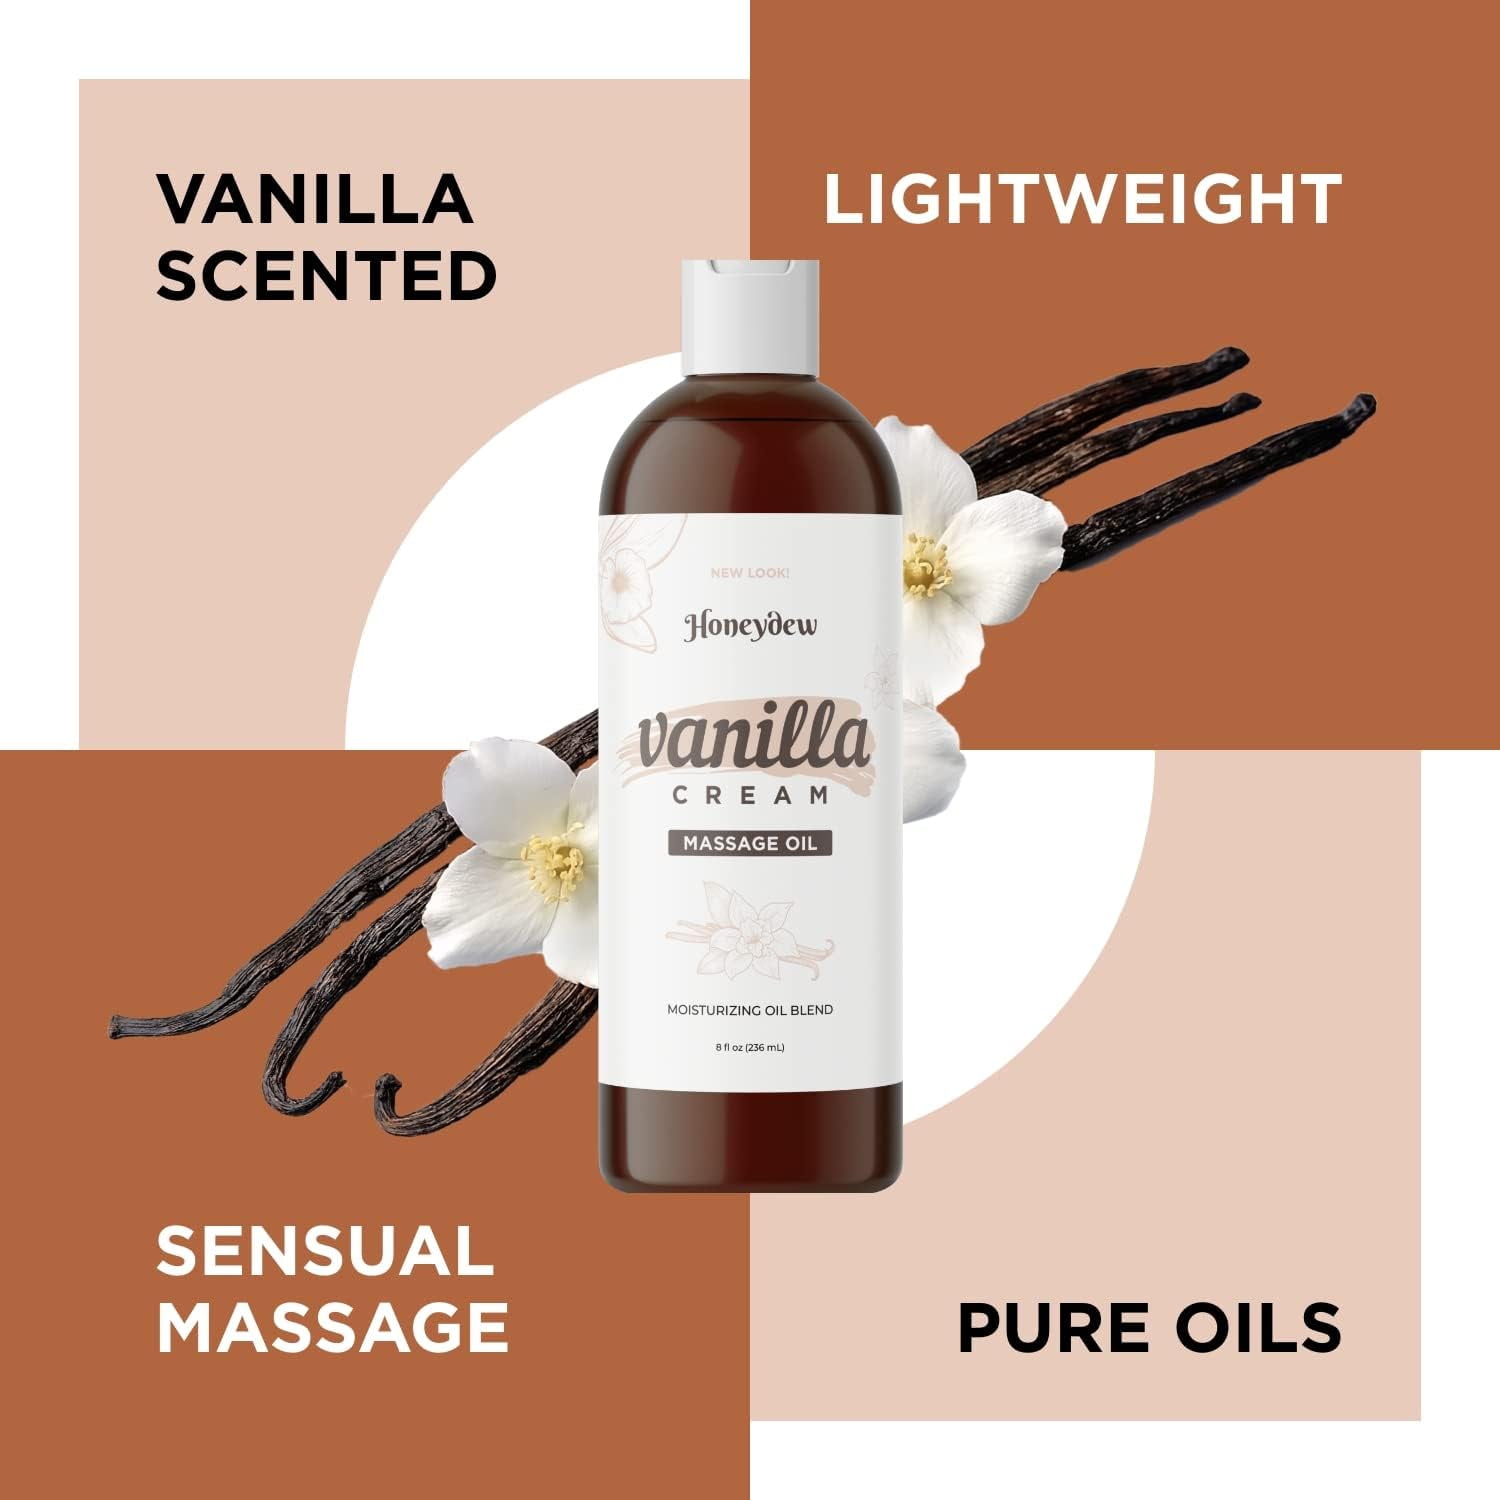 Relaxing Full Body Massage Oil for Men and Women - Highly Absorbent Vanilla Body  Oil for Dry Skin Care with Natural Sweet Almond Oil Jojoba and Coconut Oil,  8 fl oz